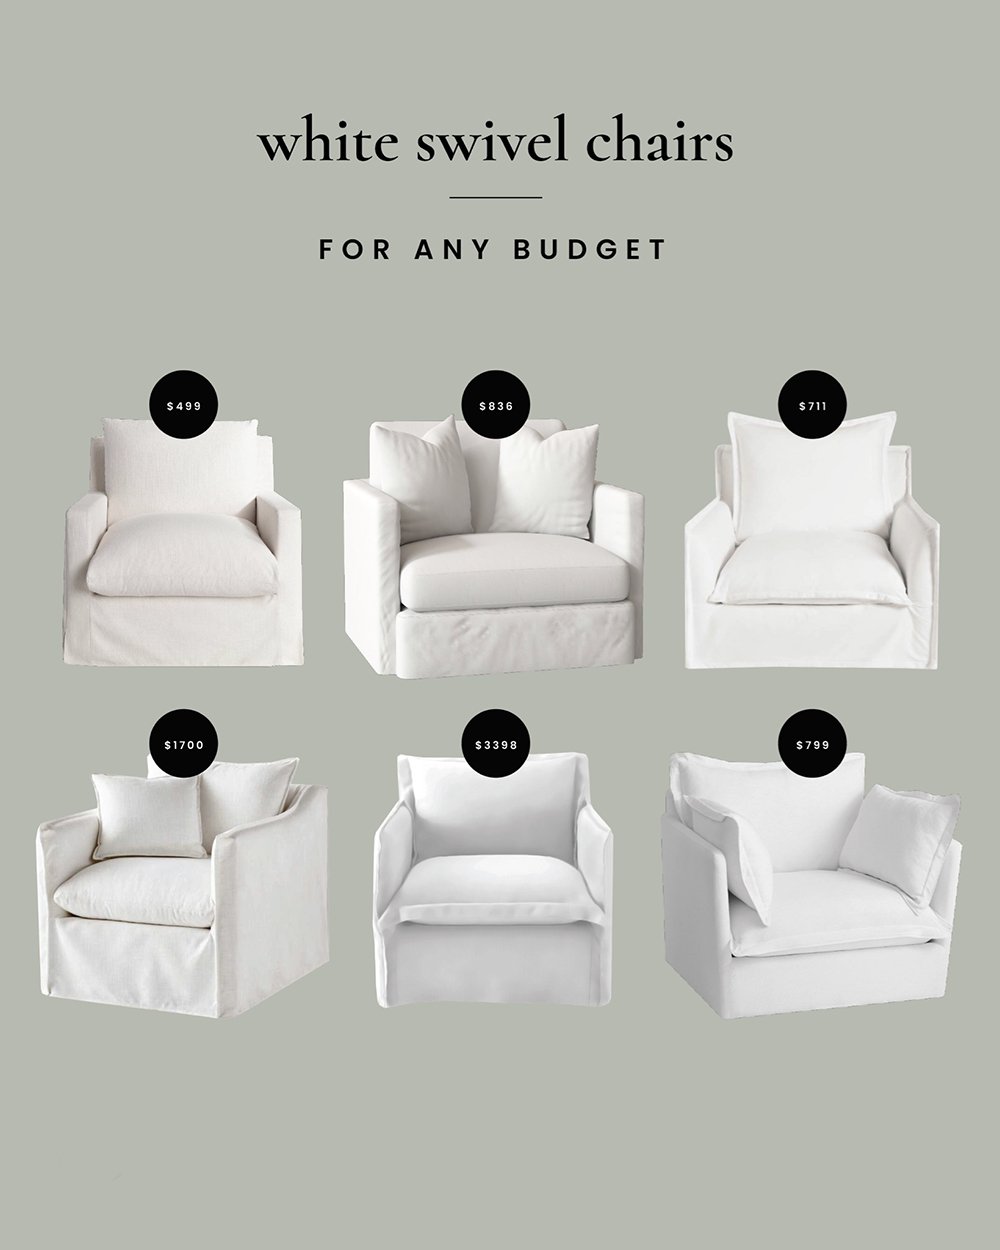 White Swivel Chairs for Any Budget - roomfortuesday.com